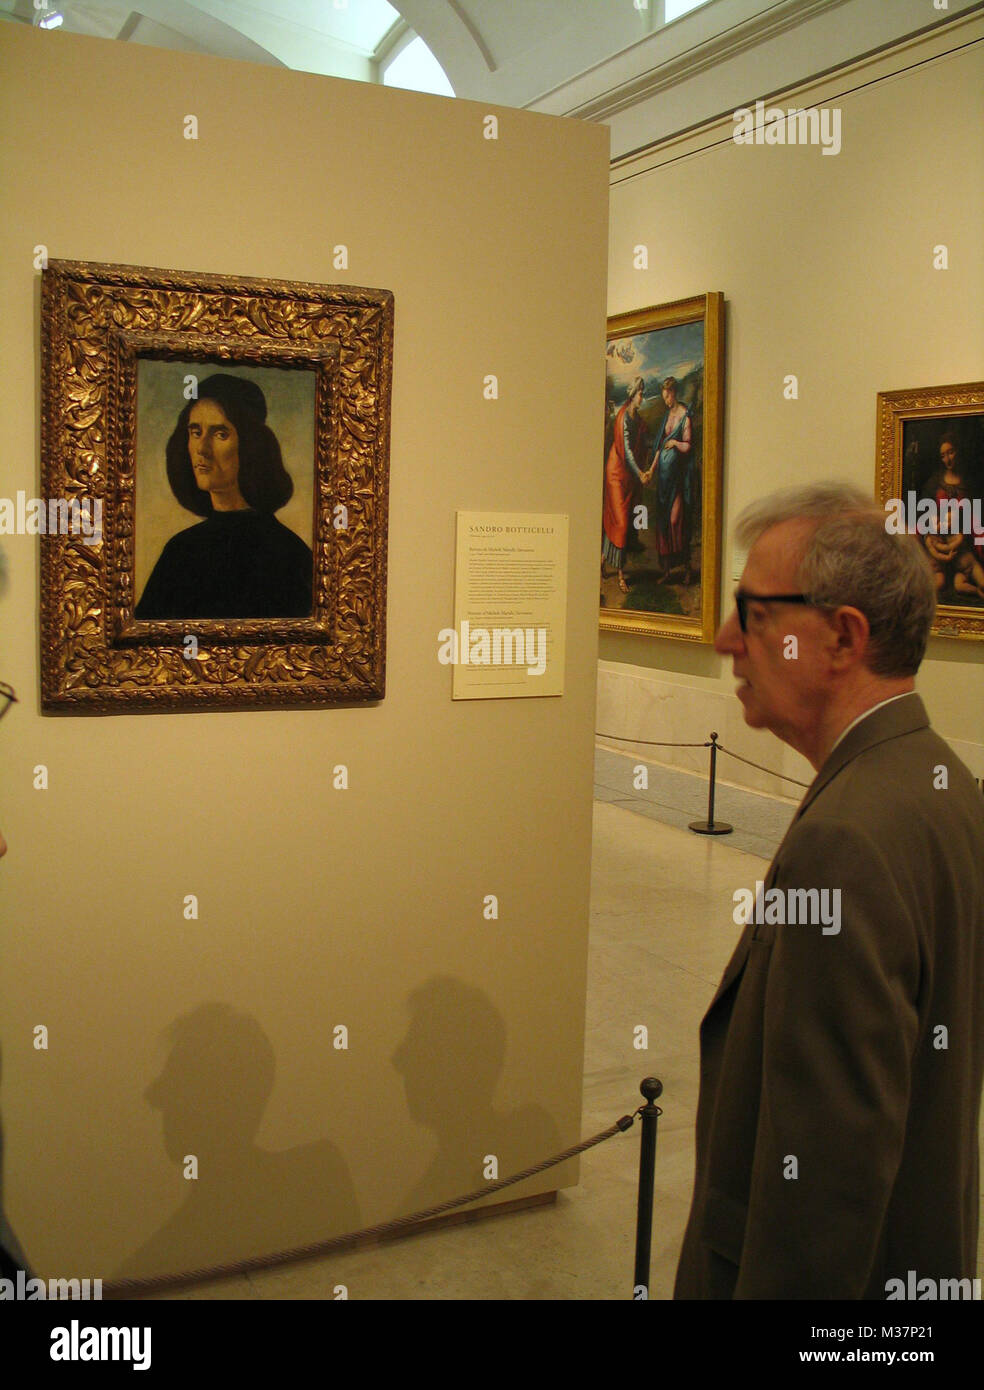 ******** EXCLUSIVE COVERAGE  ******** Woody Allen takes a private tour of the Museo Nacional Del Prado in Madrid, Spain. The tour was guided by Alejandro Vergara, the Senior Curator of Flemish and Northern Paintings. The Museum is usally closed on Monday's but opened especially for Woody Allen and his Guests for this private visit. May 16, 2005 Credit: Walter McBride/MediaPunch Stock Photo